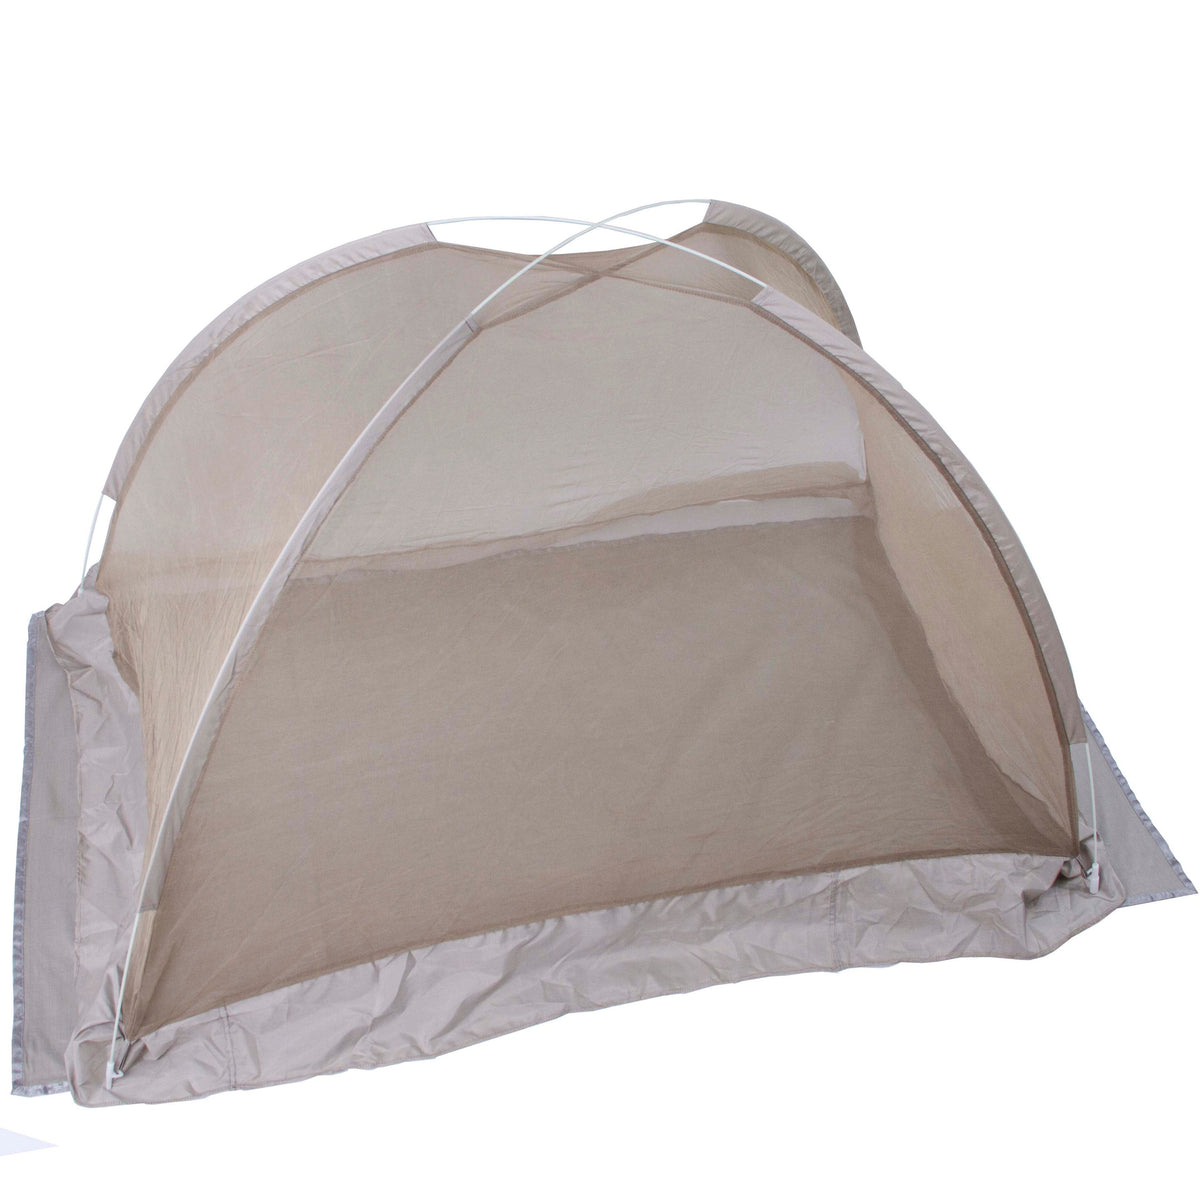 EMF shielding tent that easy to carry with two glass fiber